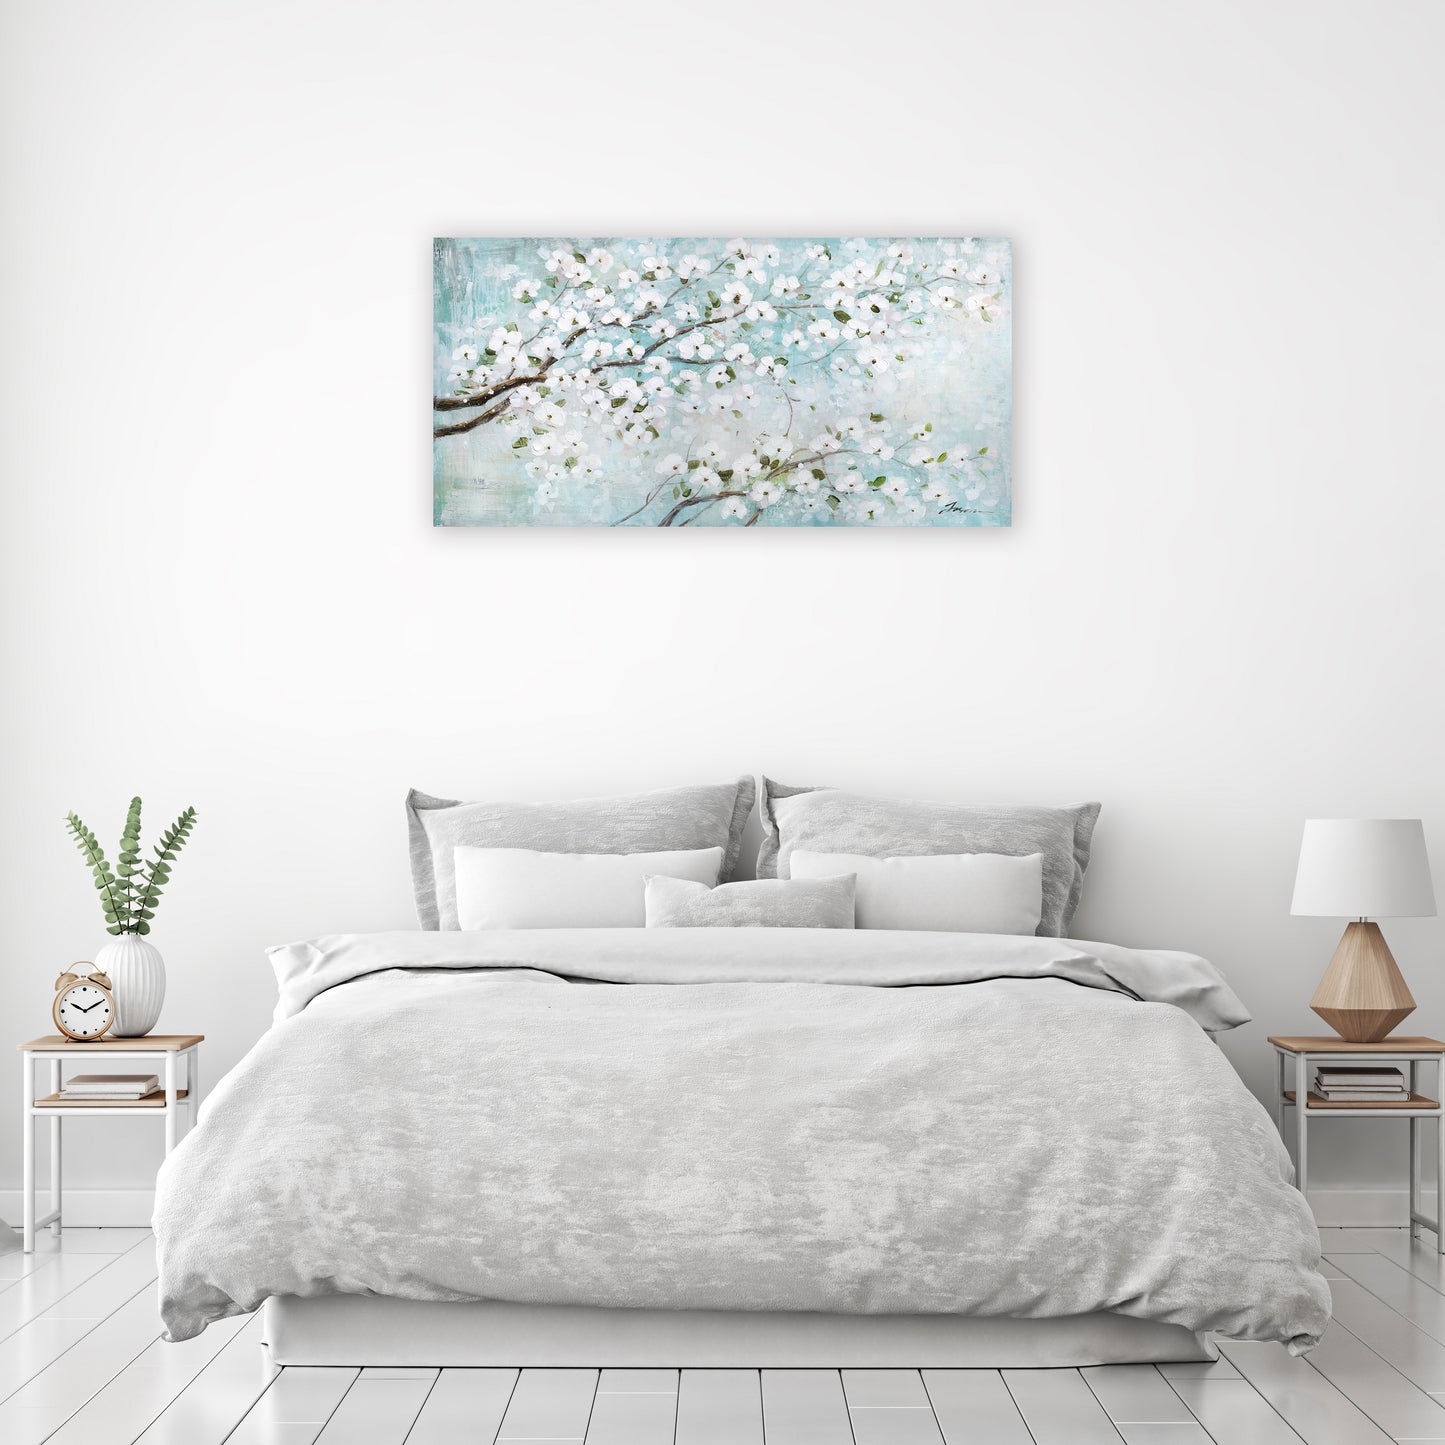 Cherry Bloosm - Oil Painting Wrapped Canvas wall art, canvas artwork for living room, bedroom, office